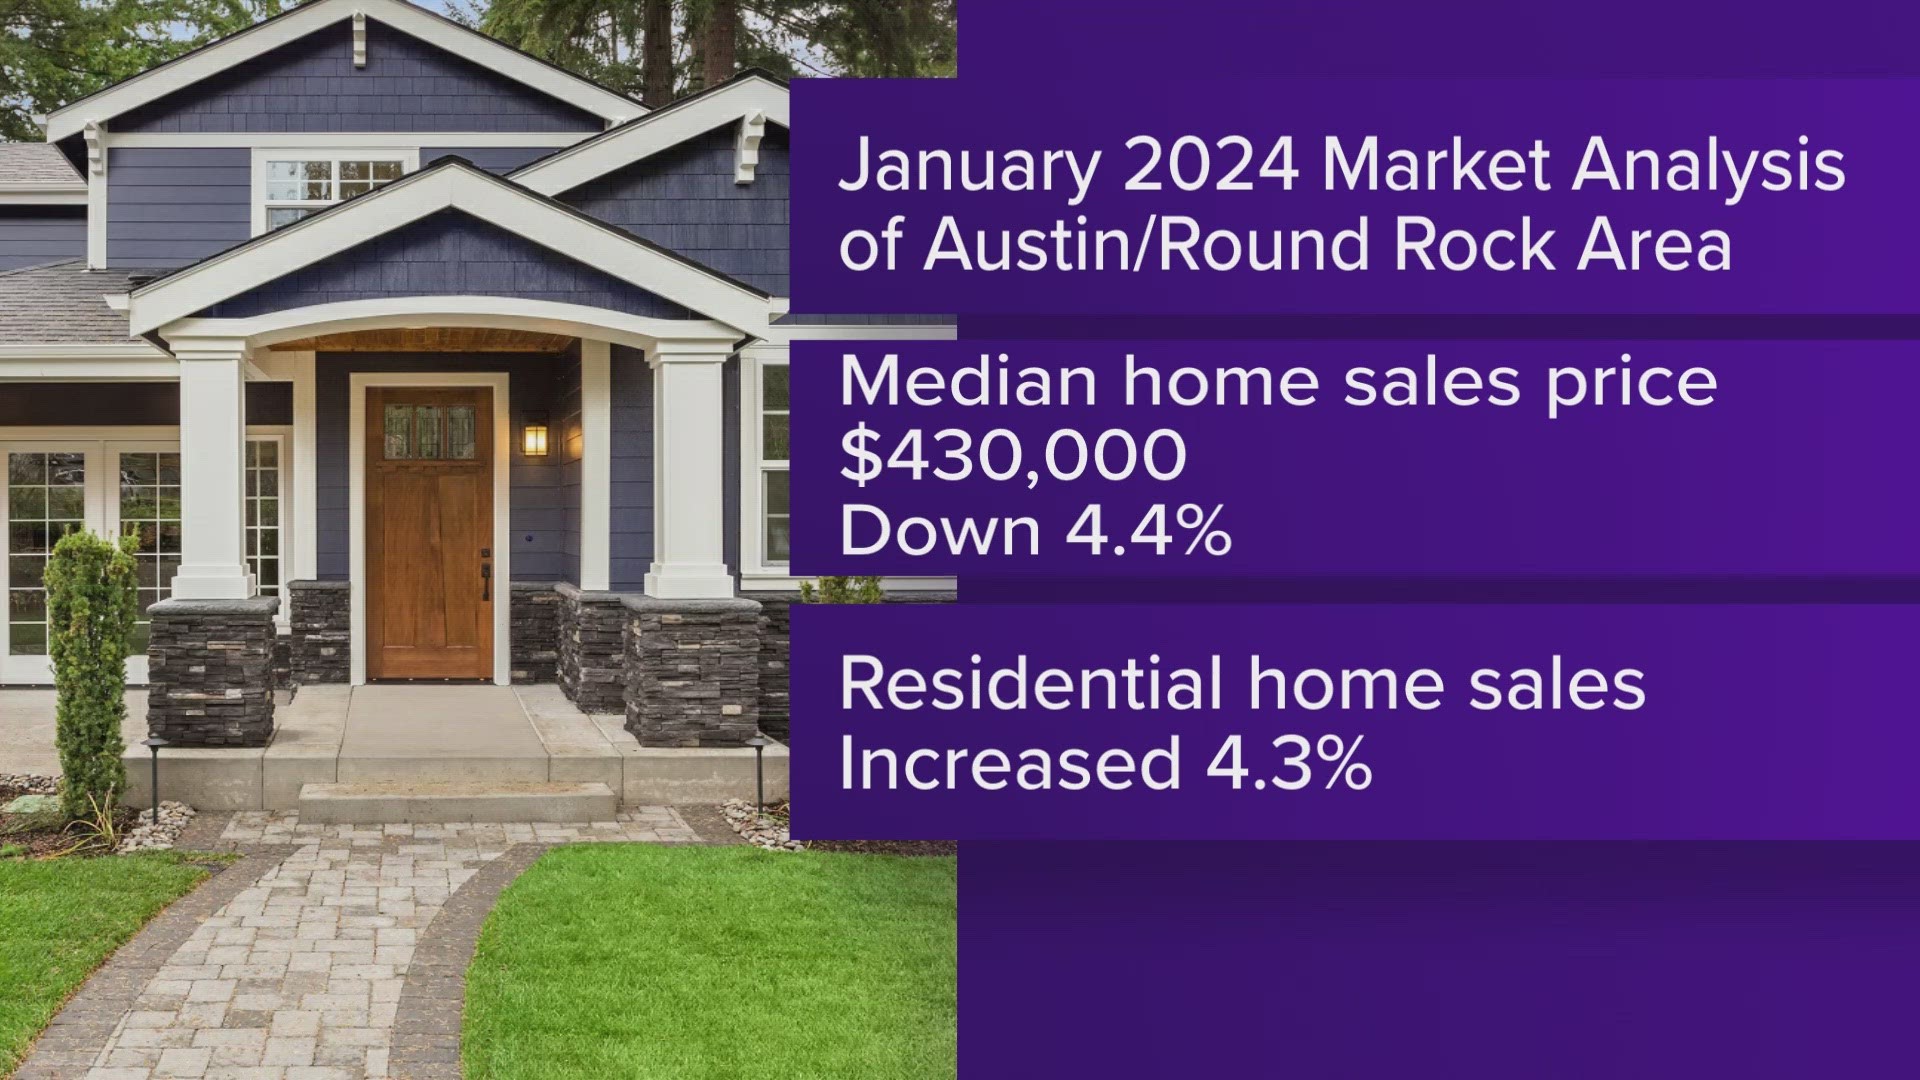 The median home price in Austin is roughly $430,000, down 4.4% from the last study.